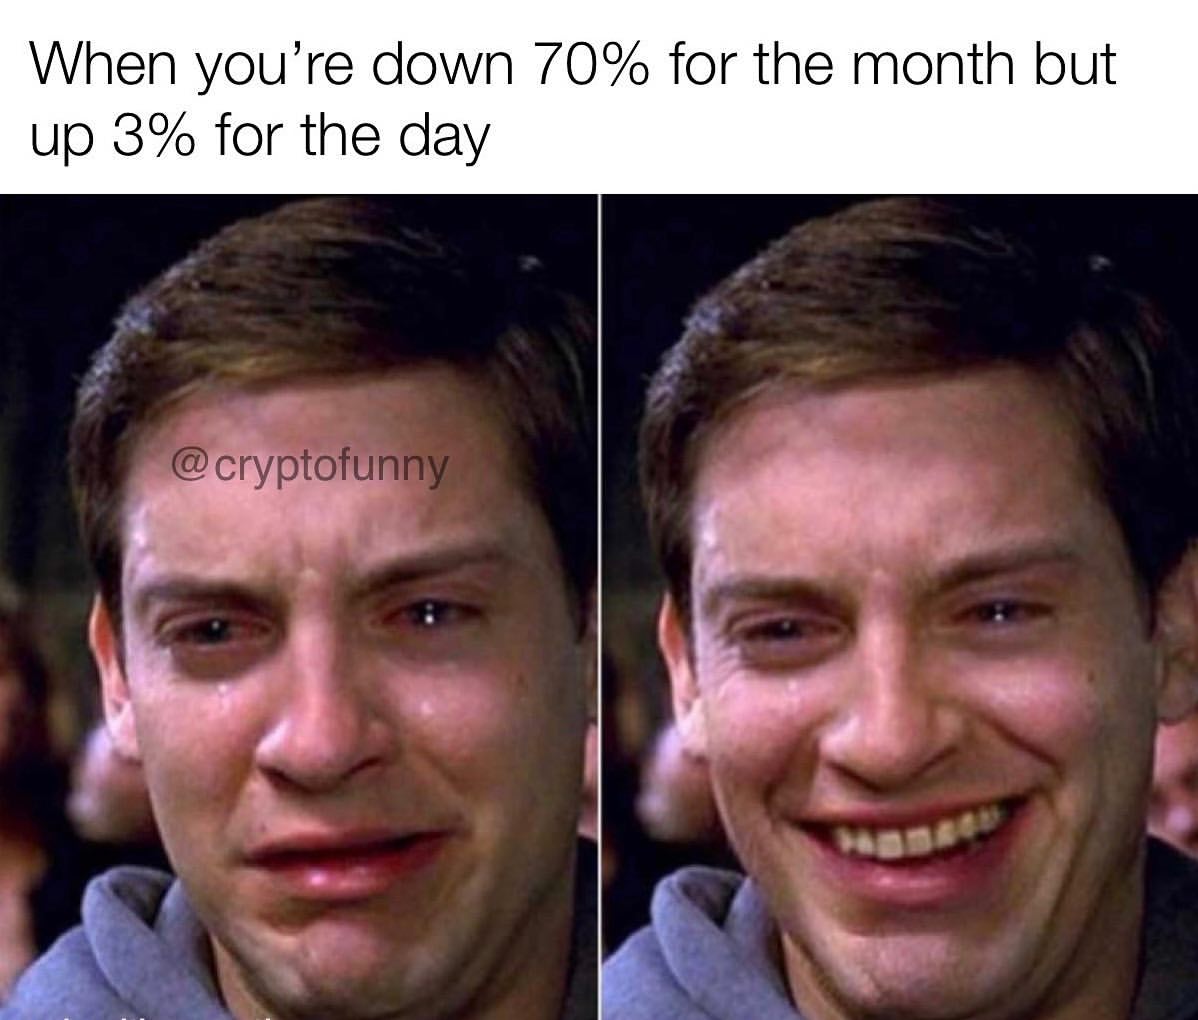 When you're down 70% for the month but up 3% for the day.